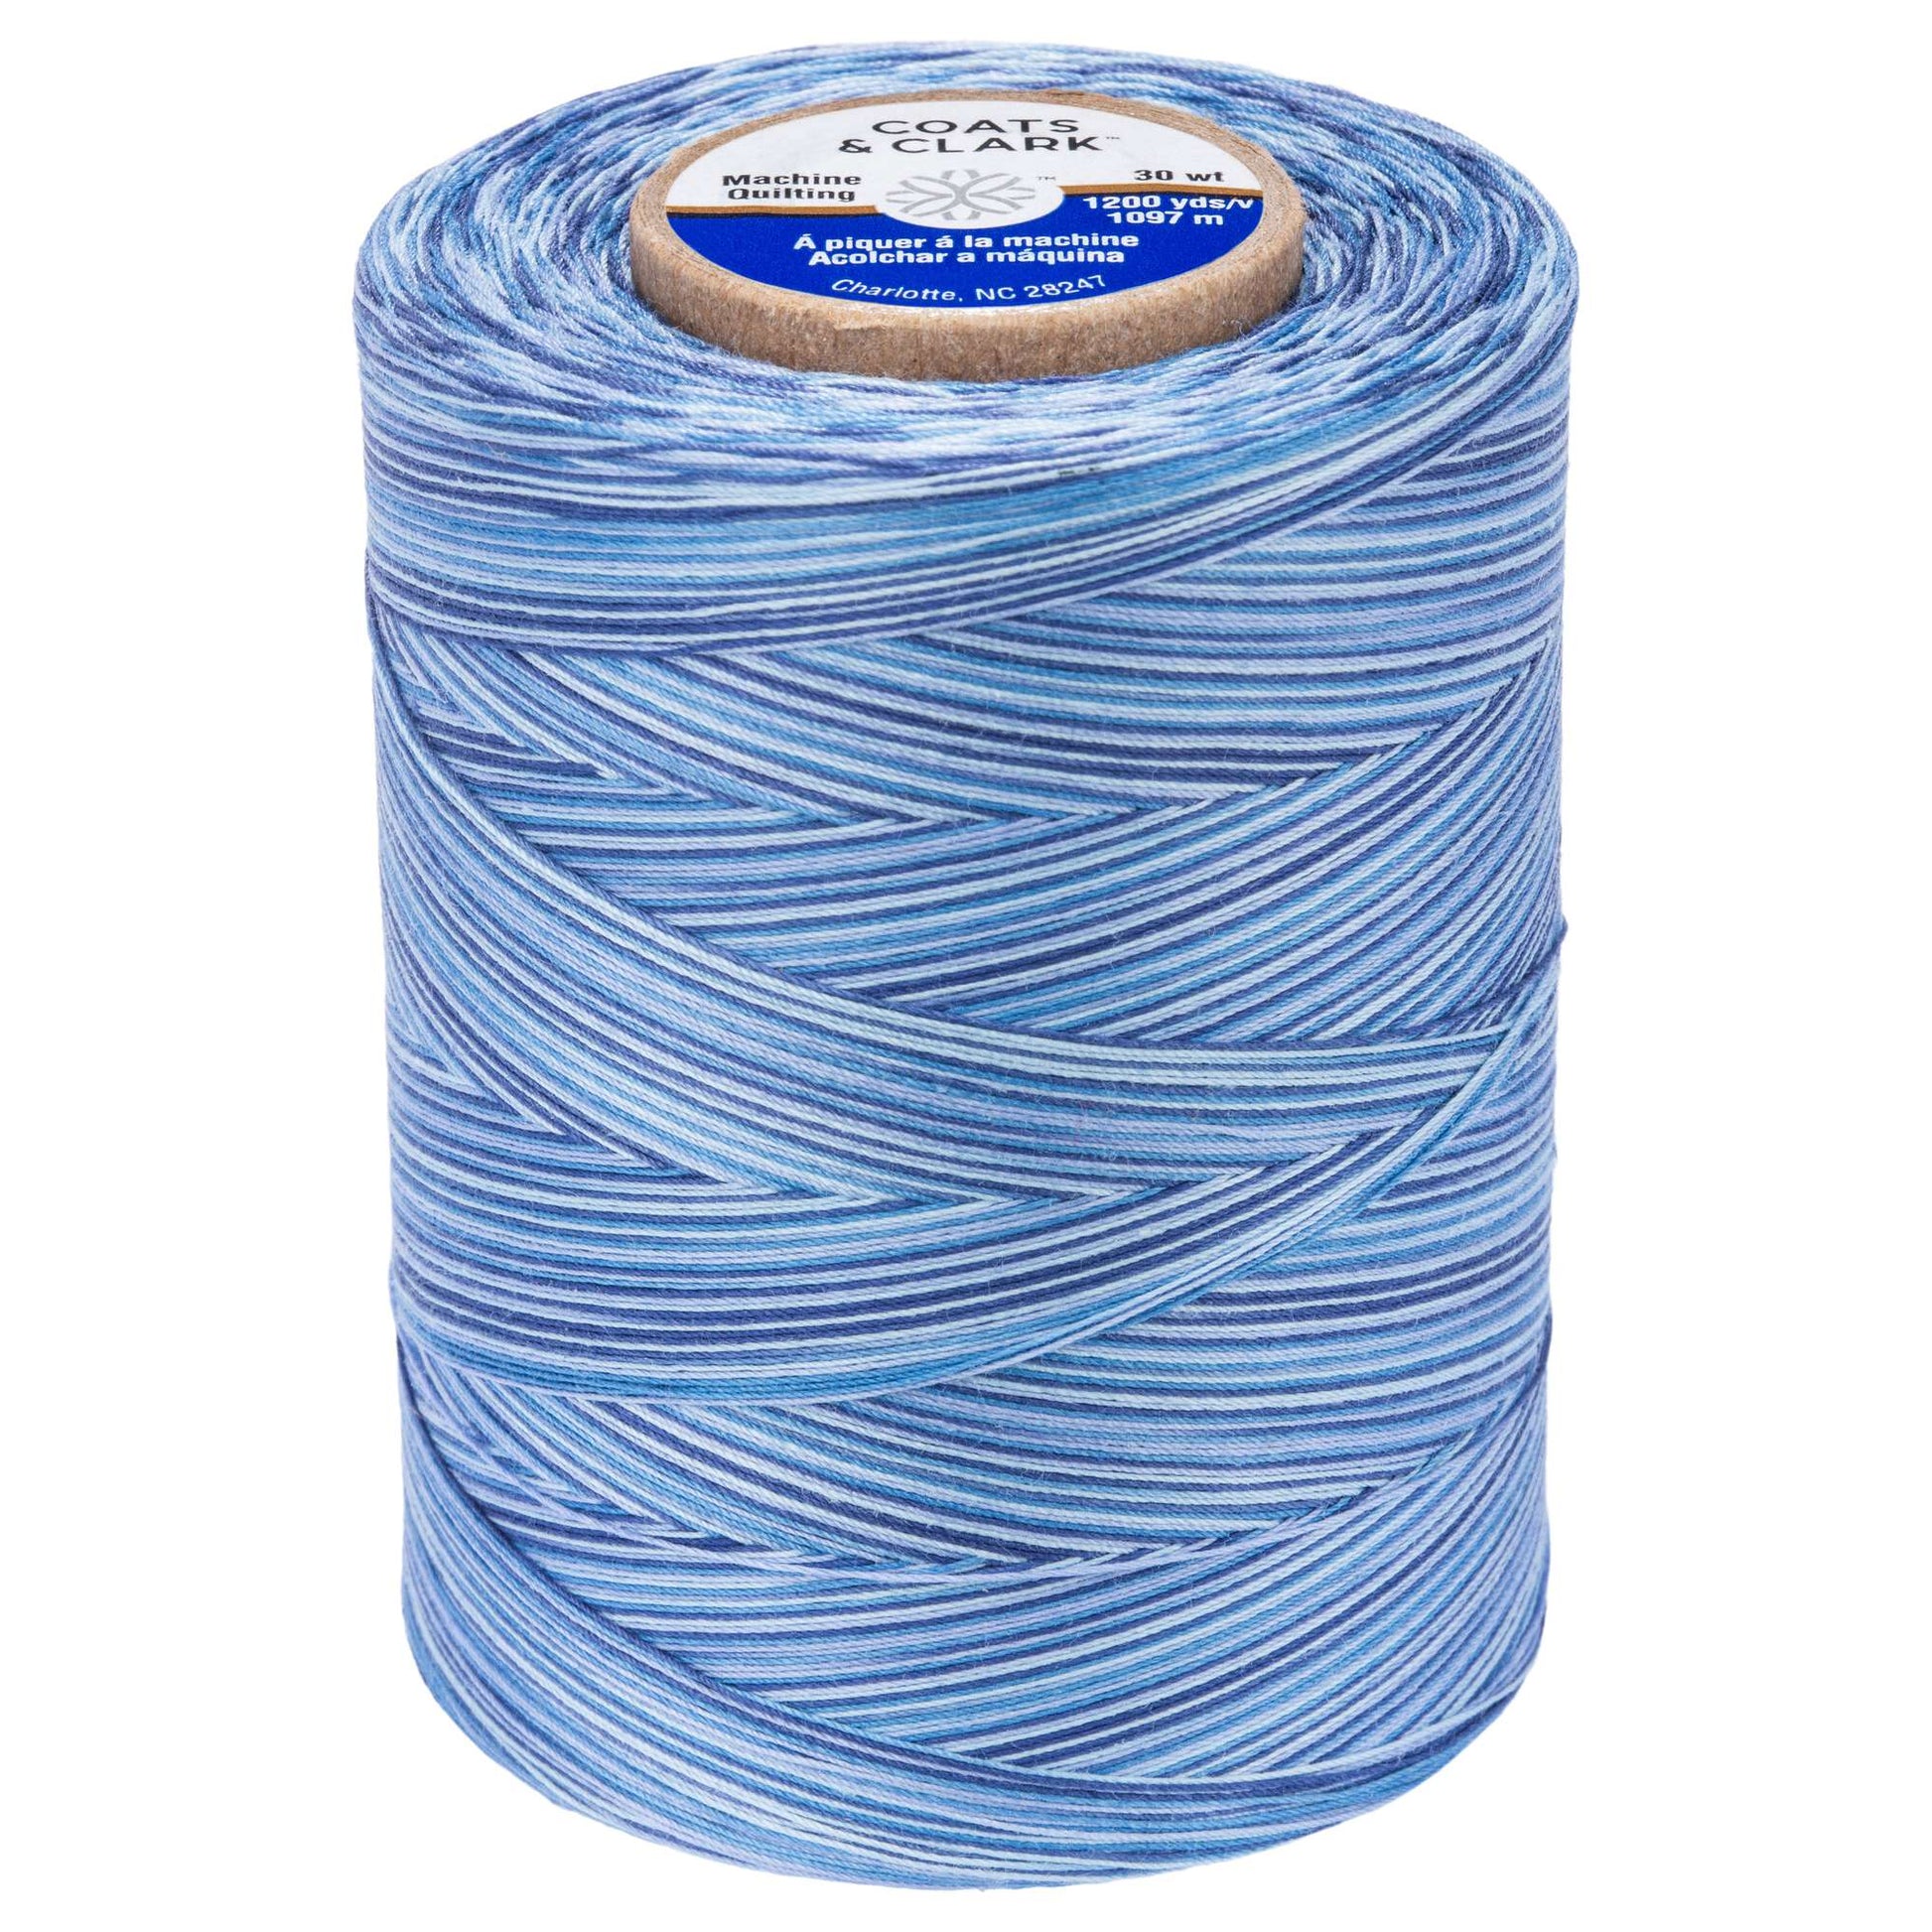 Coats & Clark Cotton Machine Quilting Multicolor Thread (1200 Yards) Blue Clouds